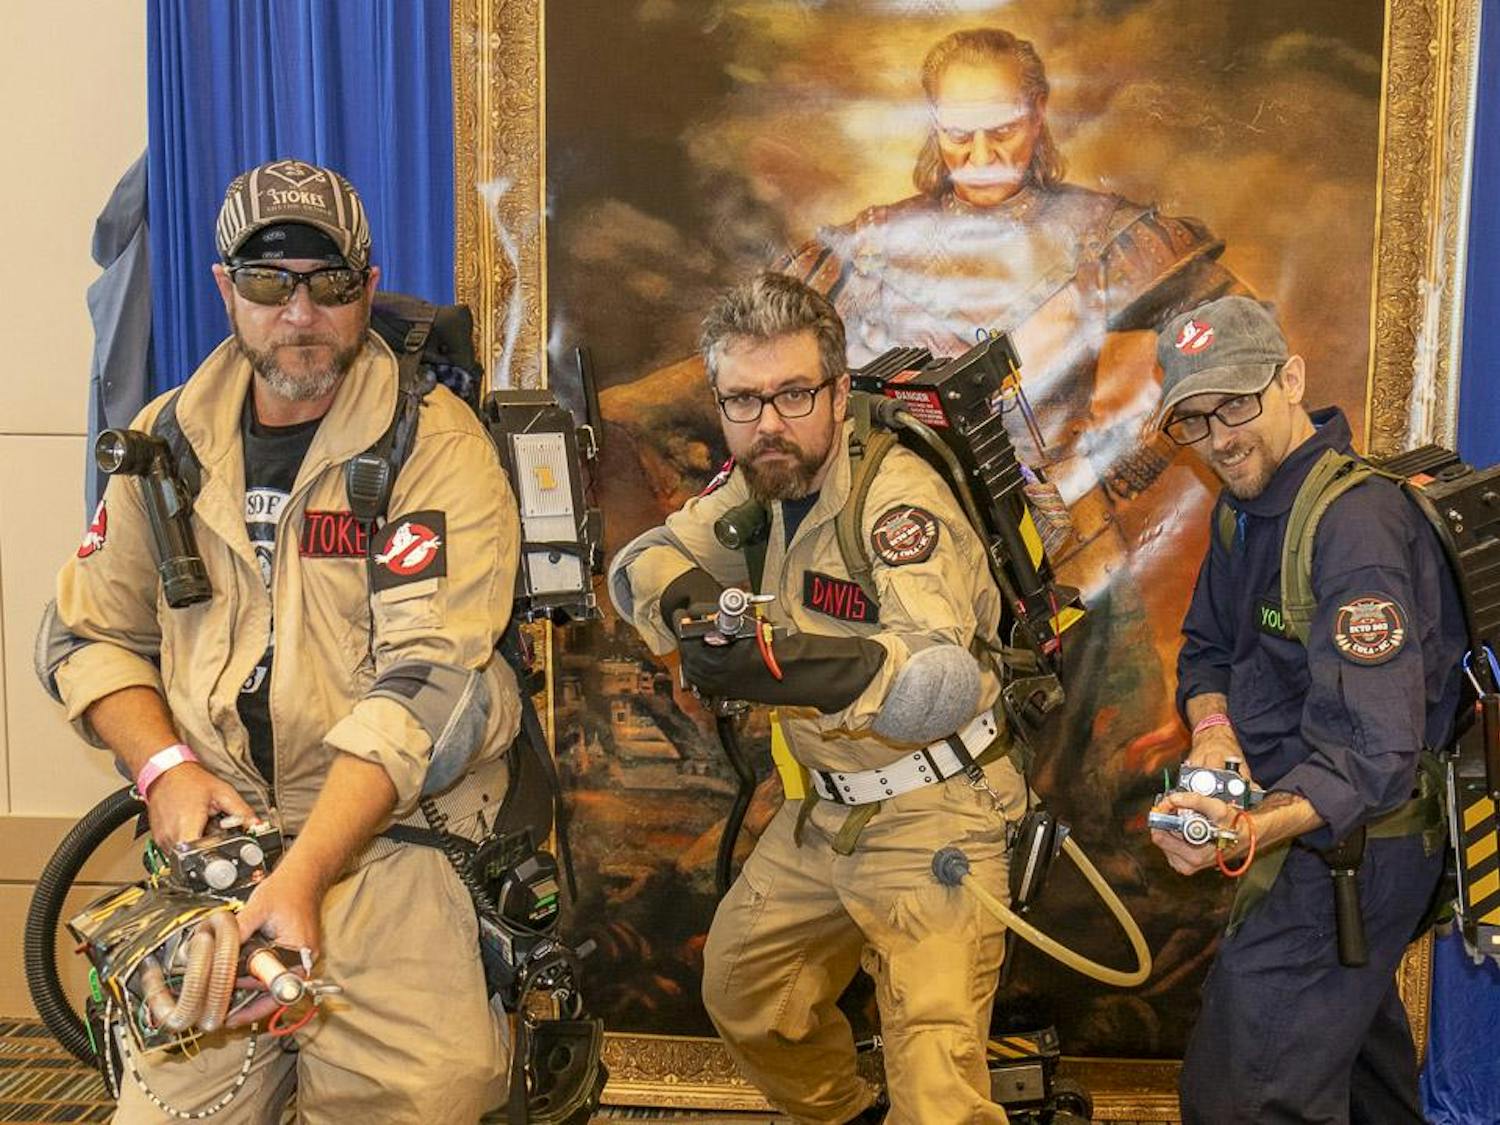 Ron Stokes (left), Andrew Davis (center) and Chris Young (right) pose in front of a painting of "Vigo the Carpathian" from "Ghostbusters 2." The three are members of the Columbia branch of a non-profit group, South Carolina Ghostbusters, who attend and run charity events and help acquire medical treatments for people in need around the Midlands.